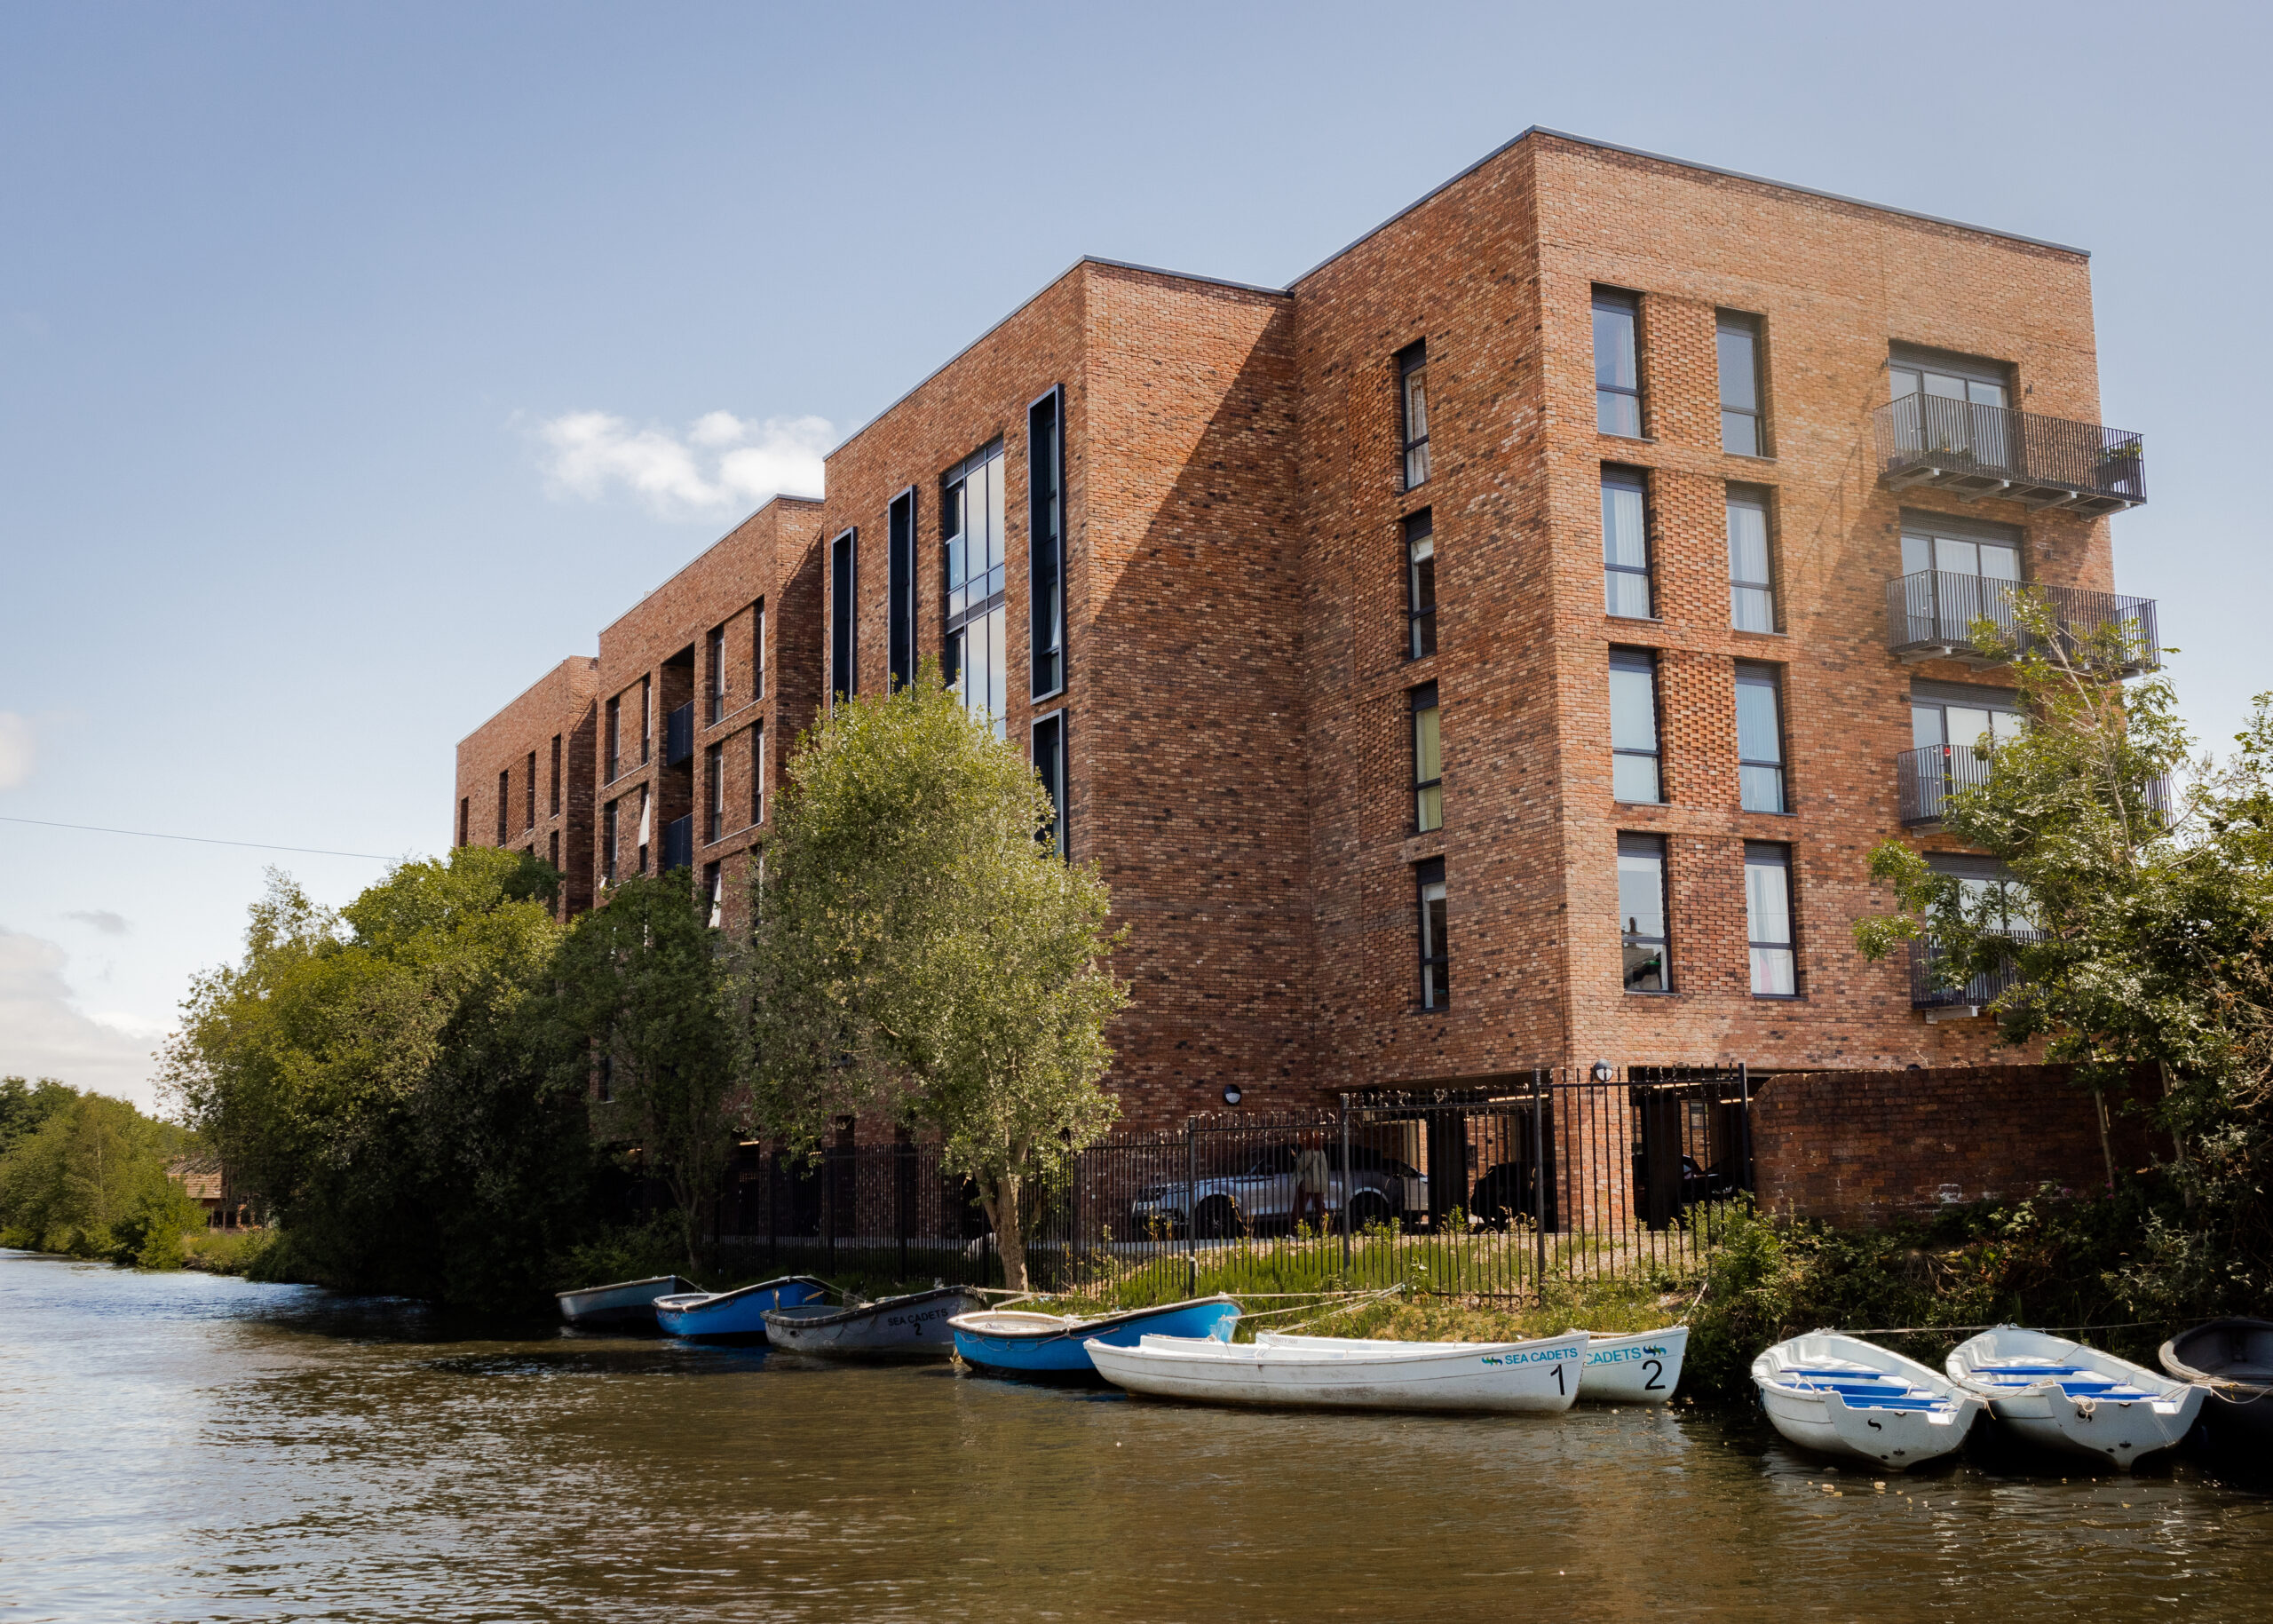 Building view wil canal and boats of The Wharf Residential Development in Altrincham in Manchester